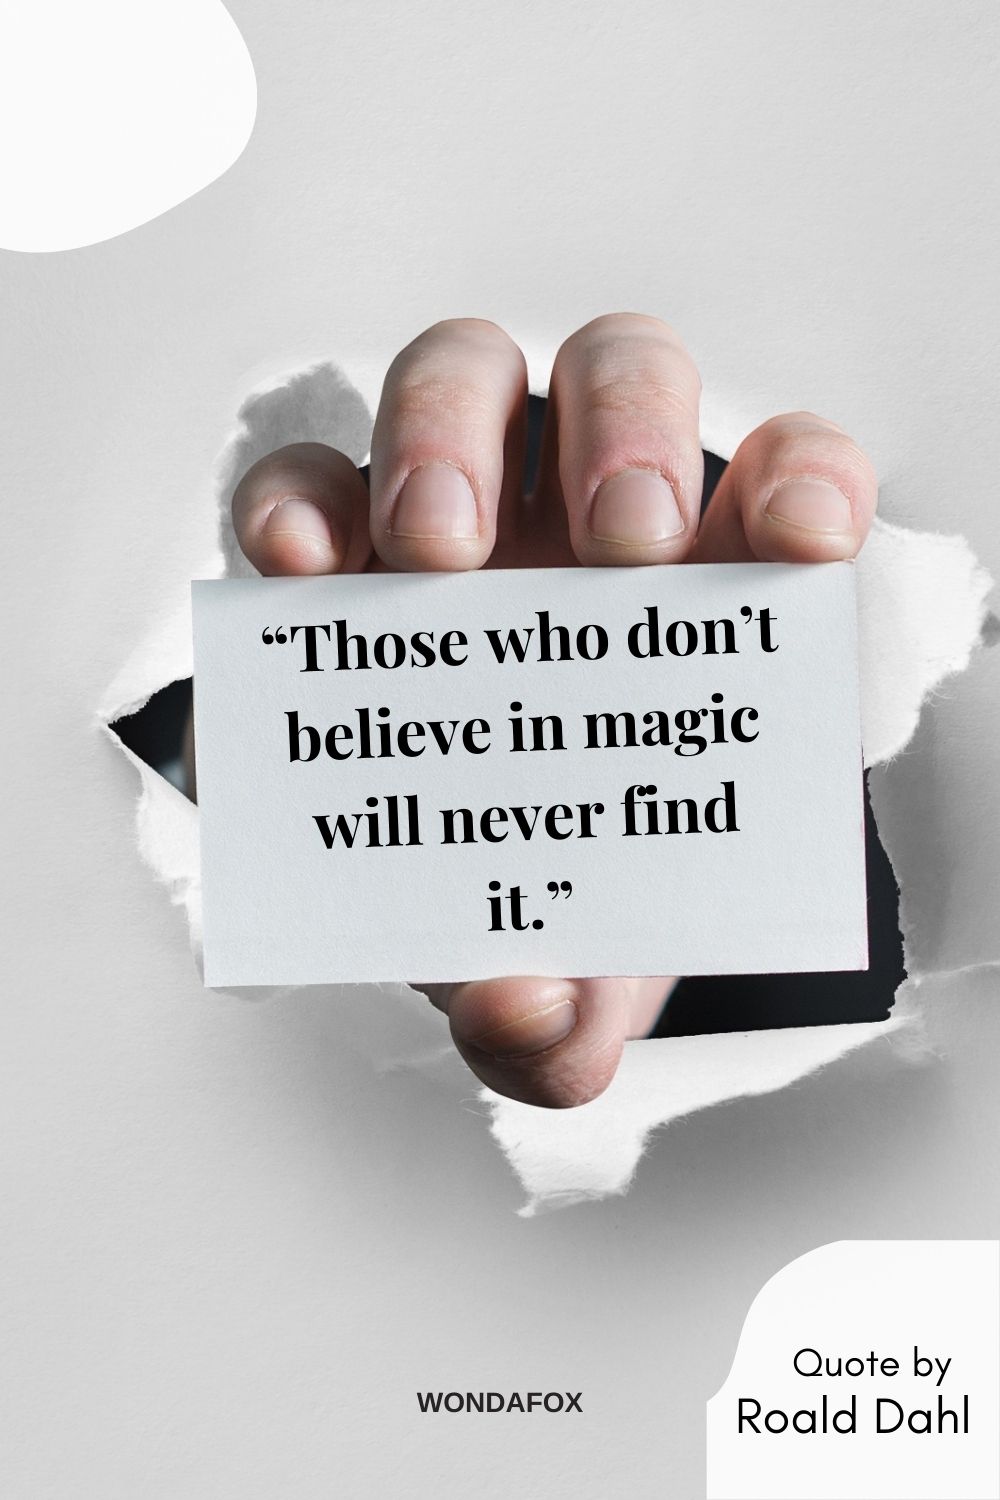 “Those who don’t believe in magic will never find it.”
Roald Dahl